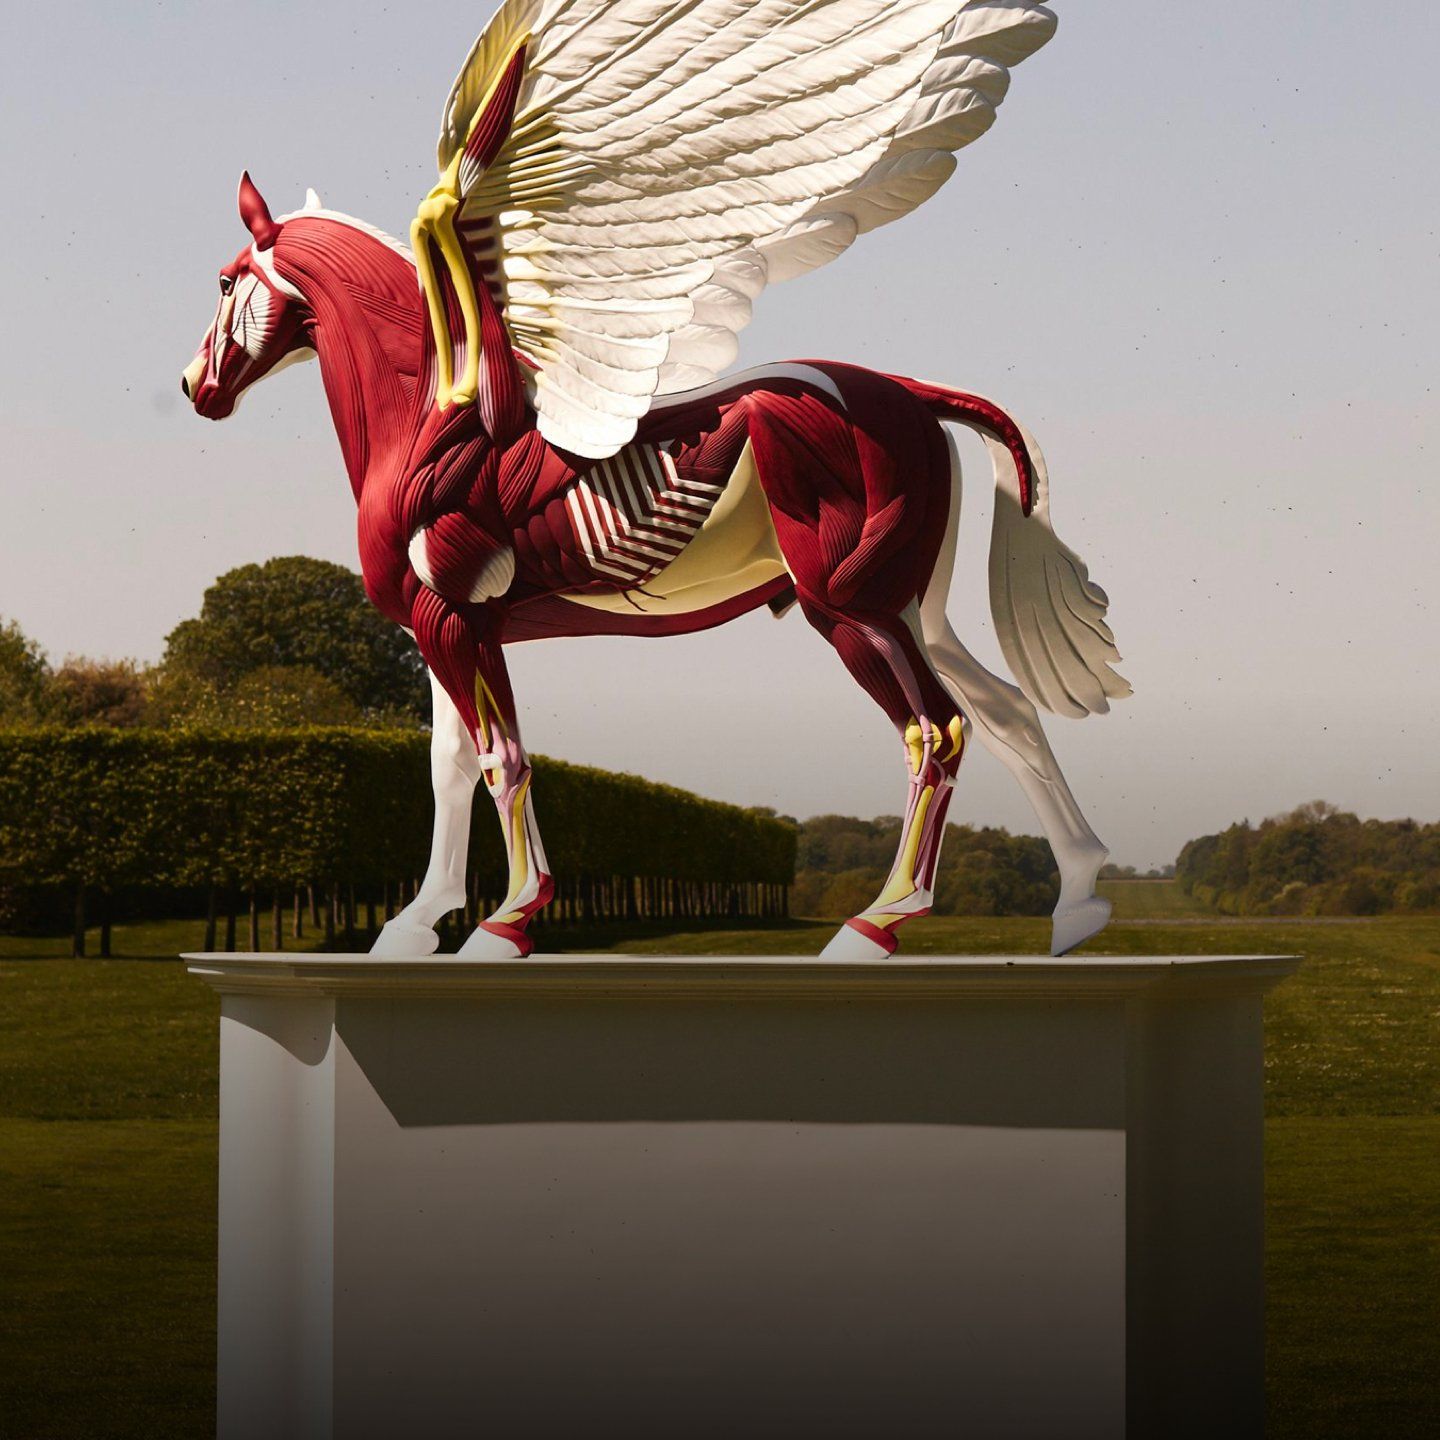 colourful sculpture of a horse with wings from the exhibtion Modernity & Heritage at Houghton Hall